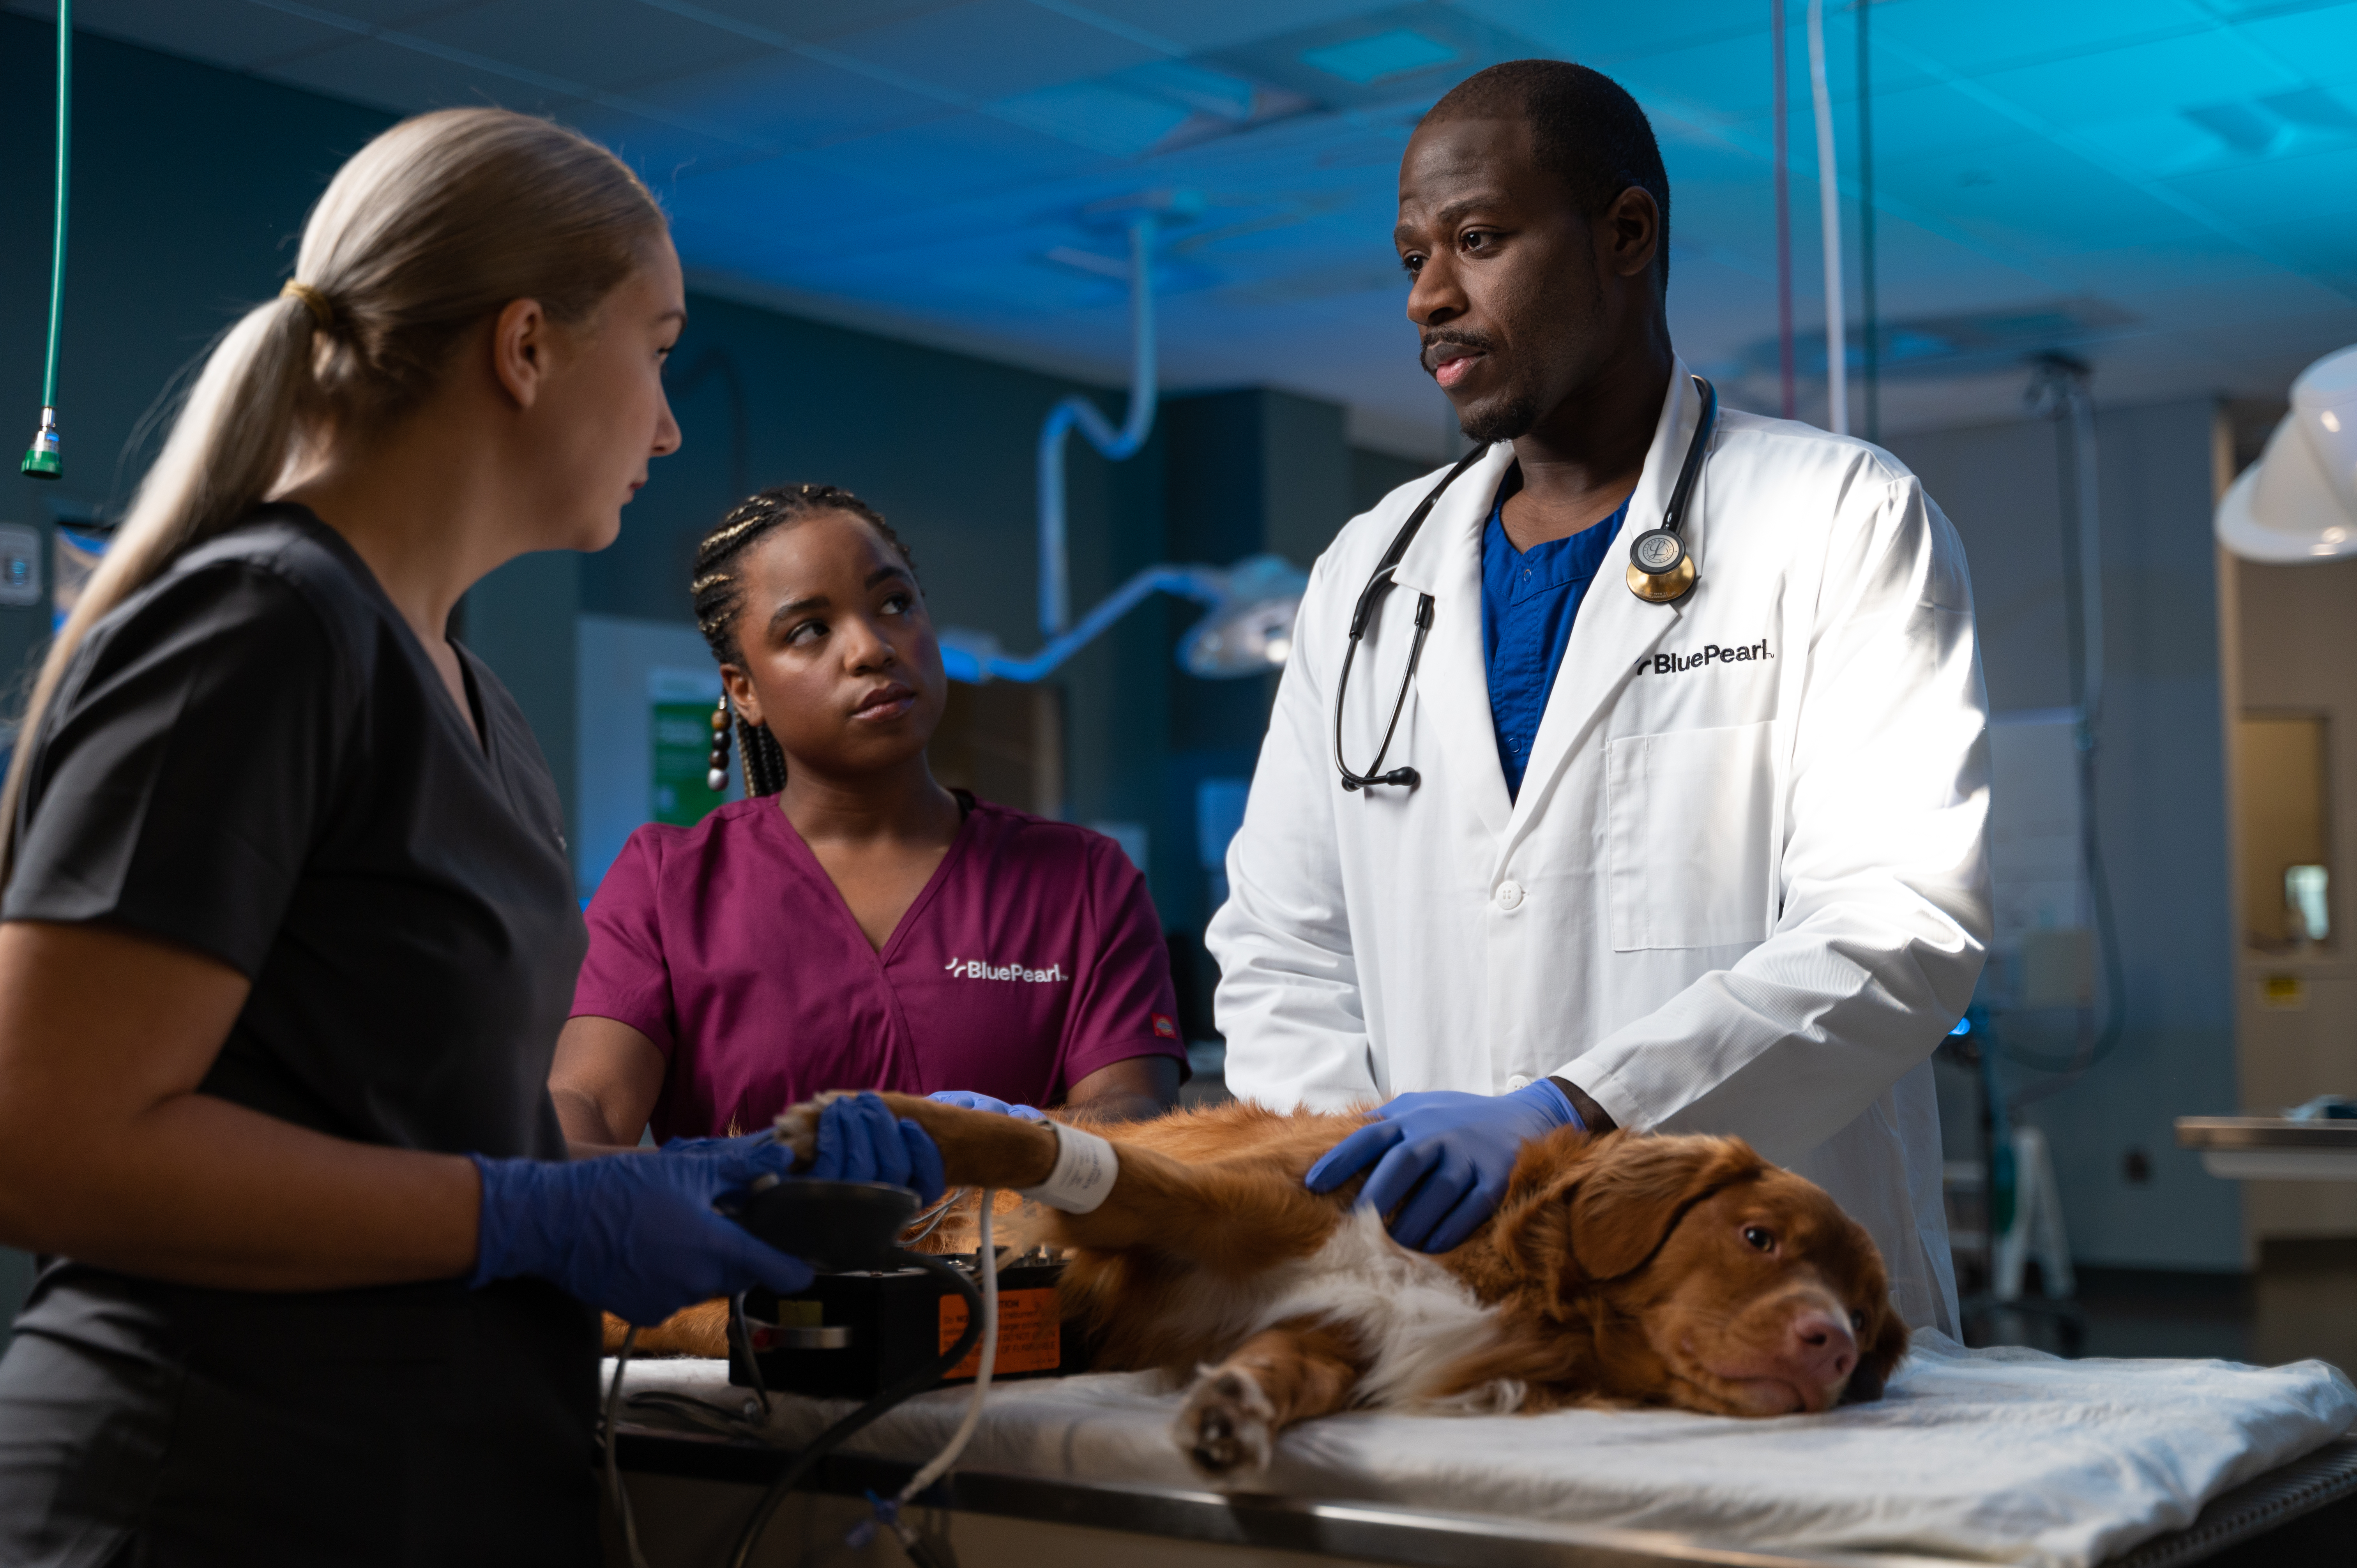 A veterinarian examines a dog while two technicians in scrubs assist.